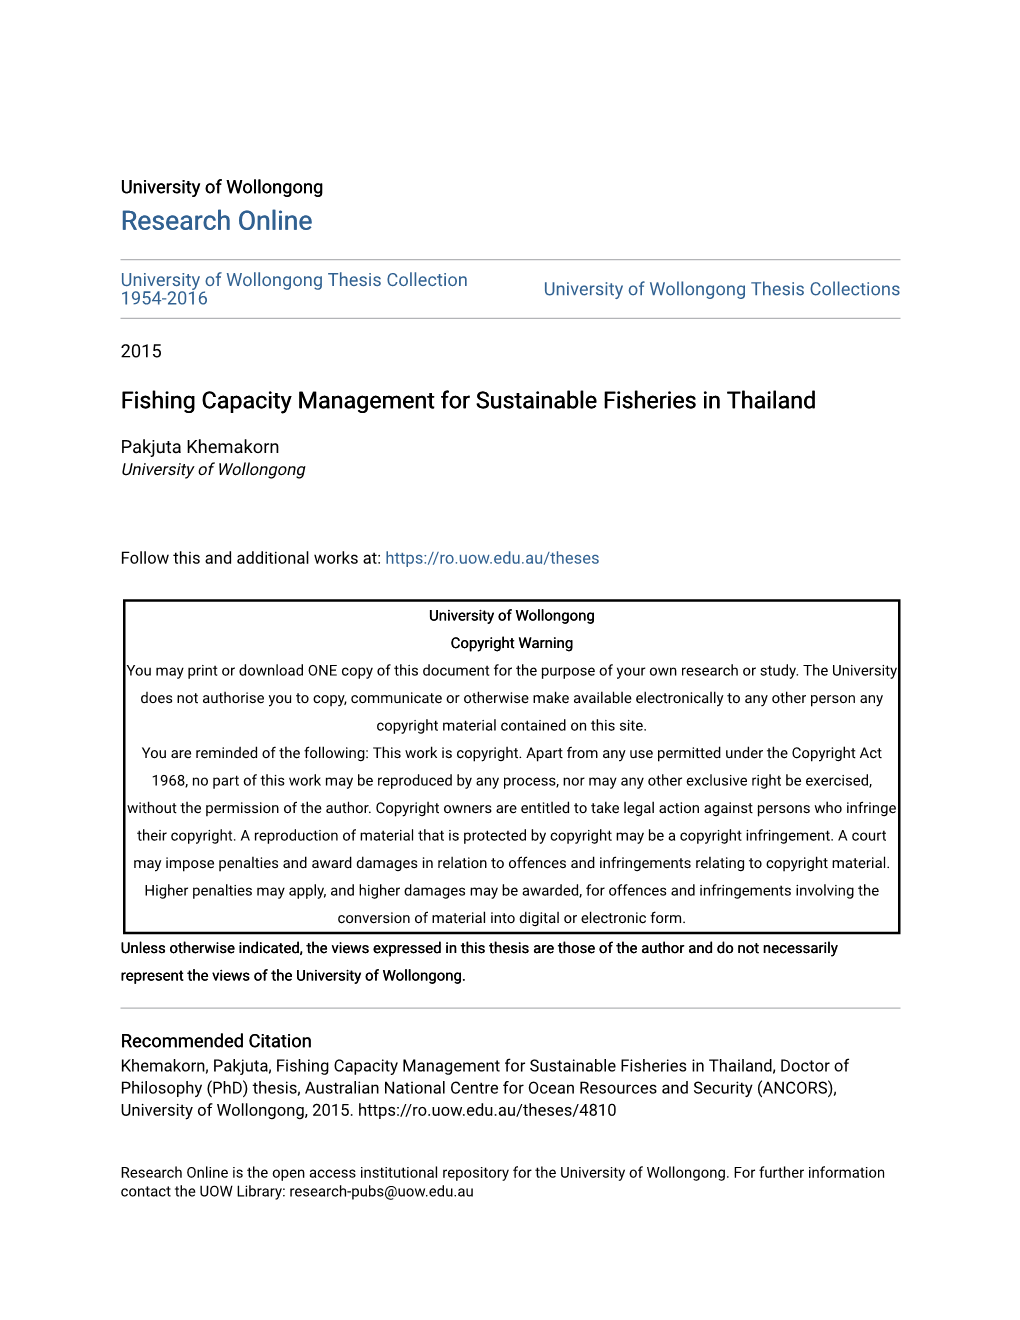 Fishing Capacity Management for Sustainable Fisheries in Thailand